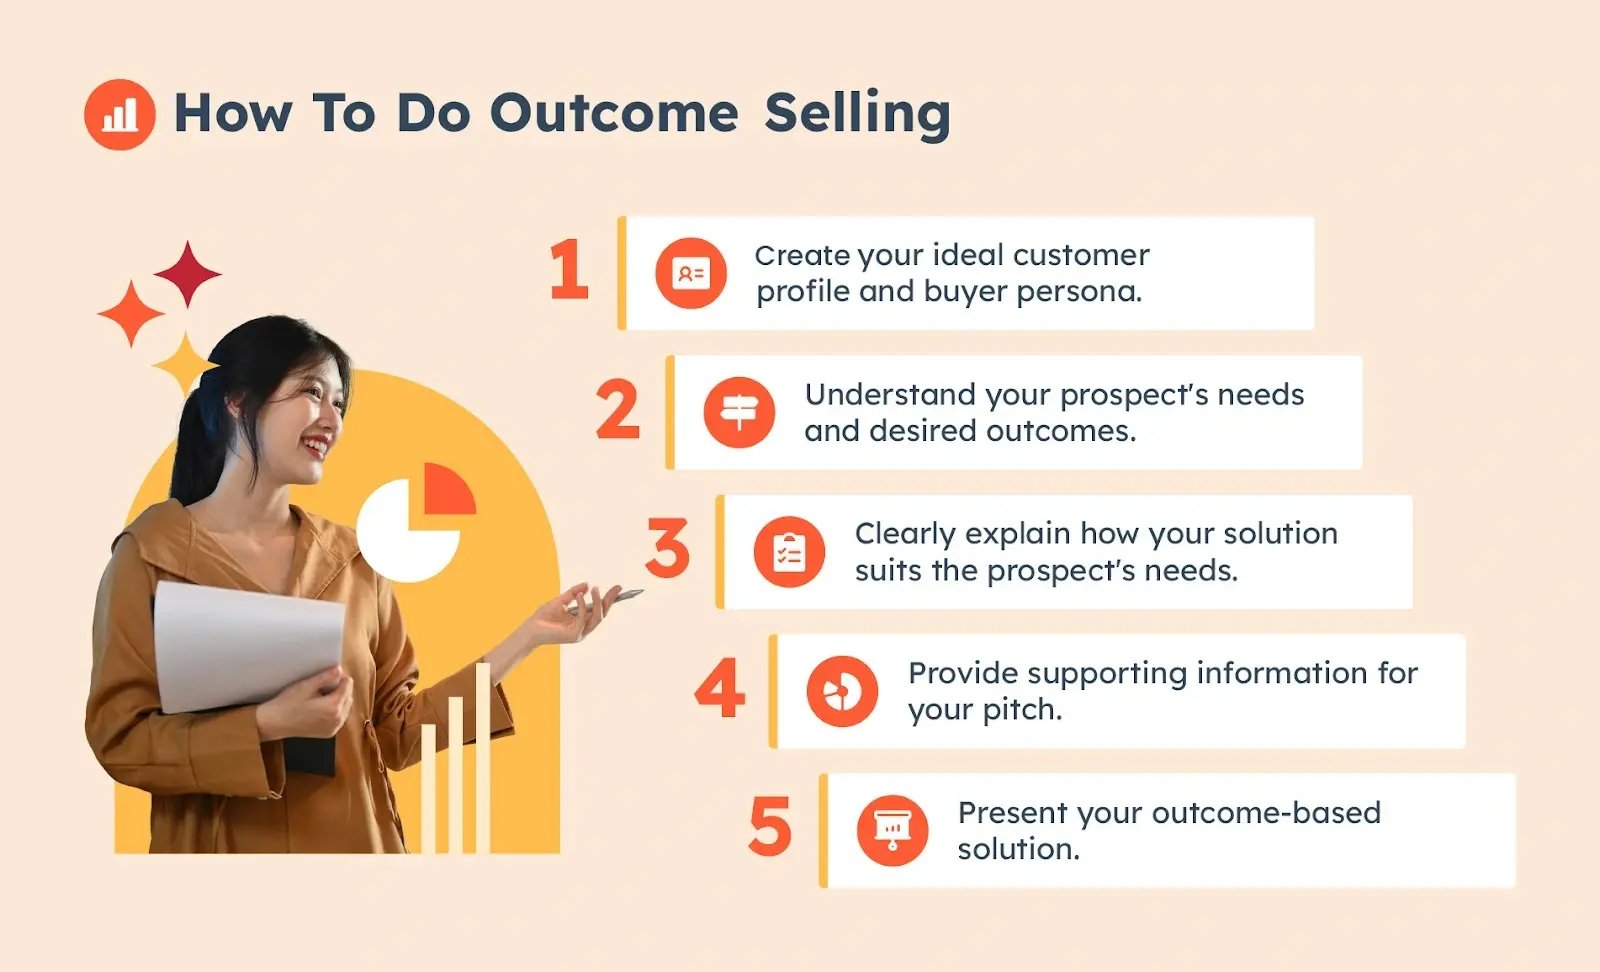 How to do outcome selling.